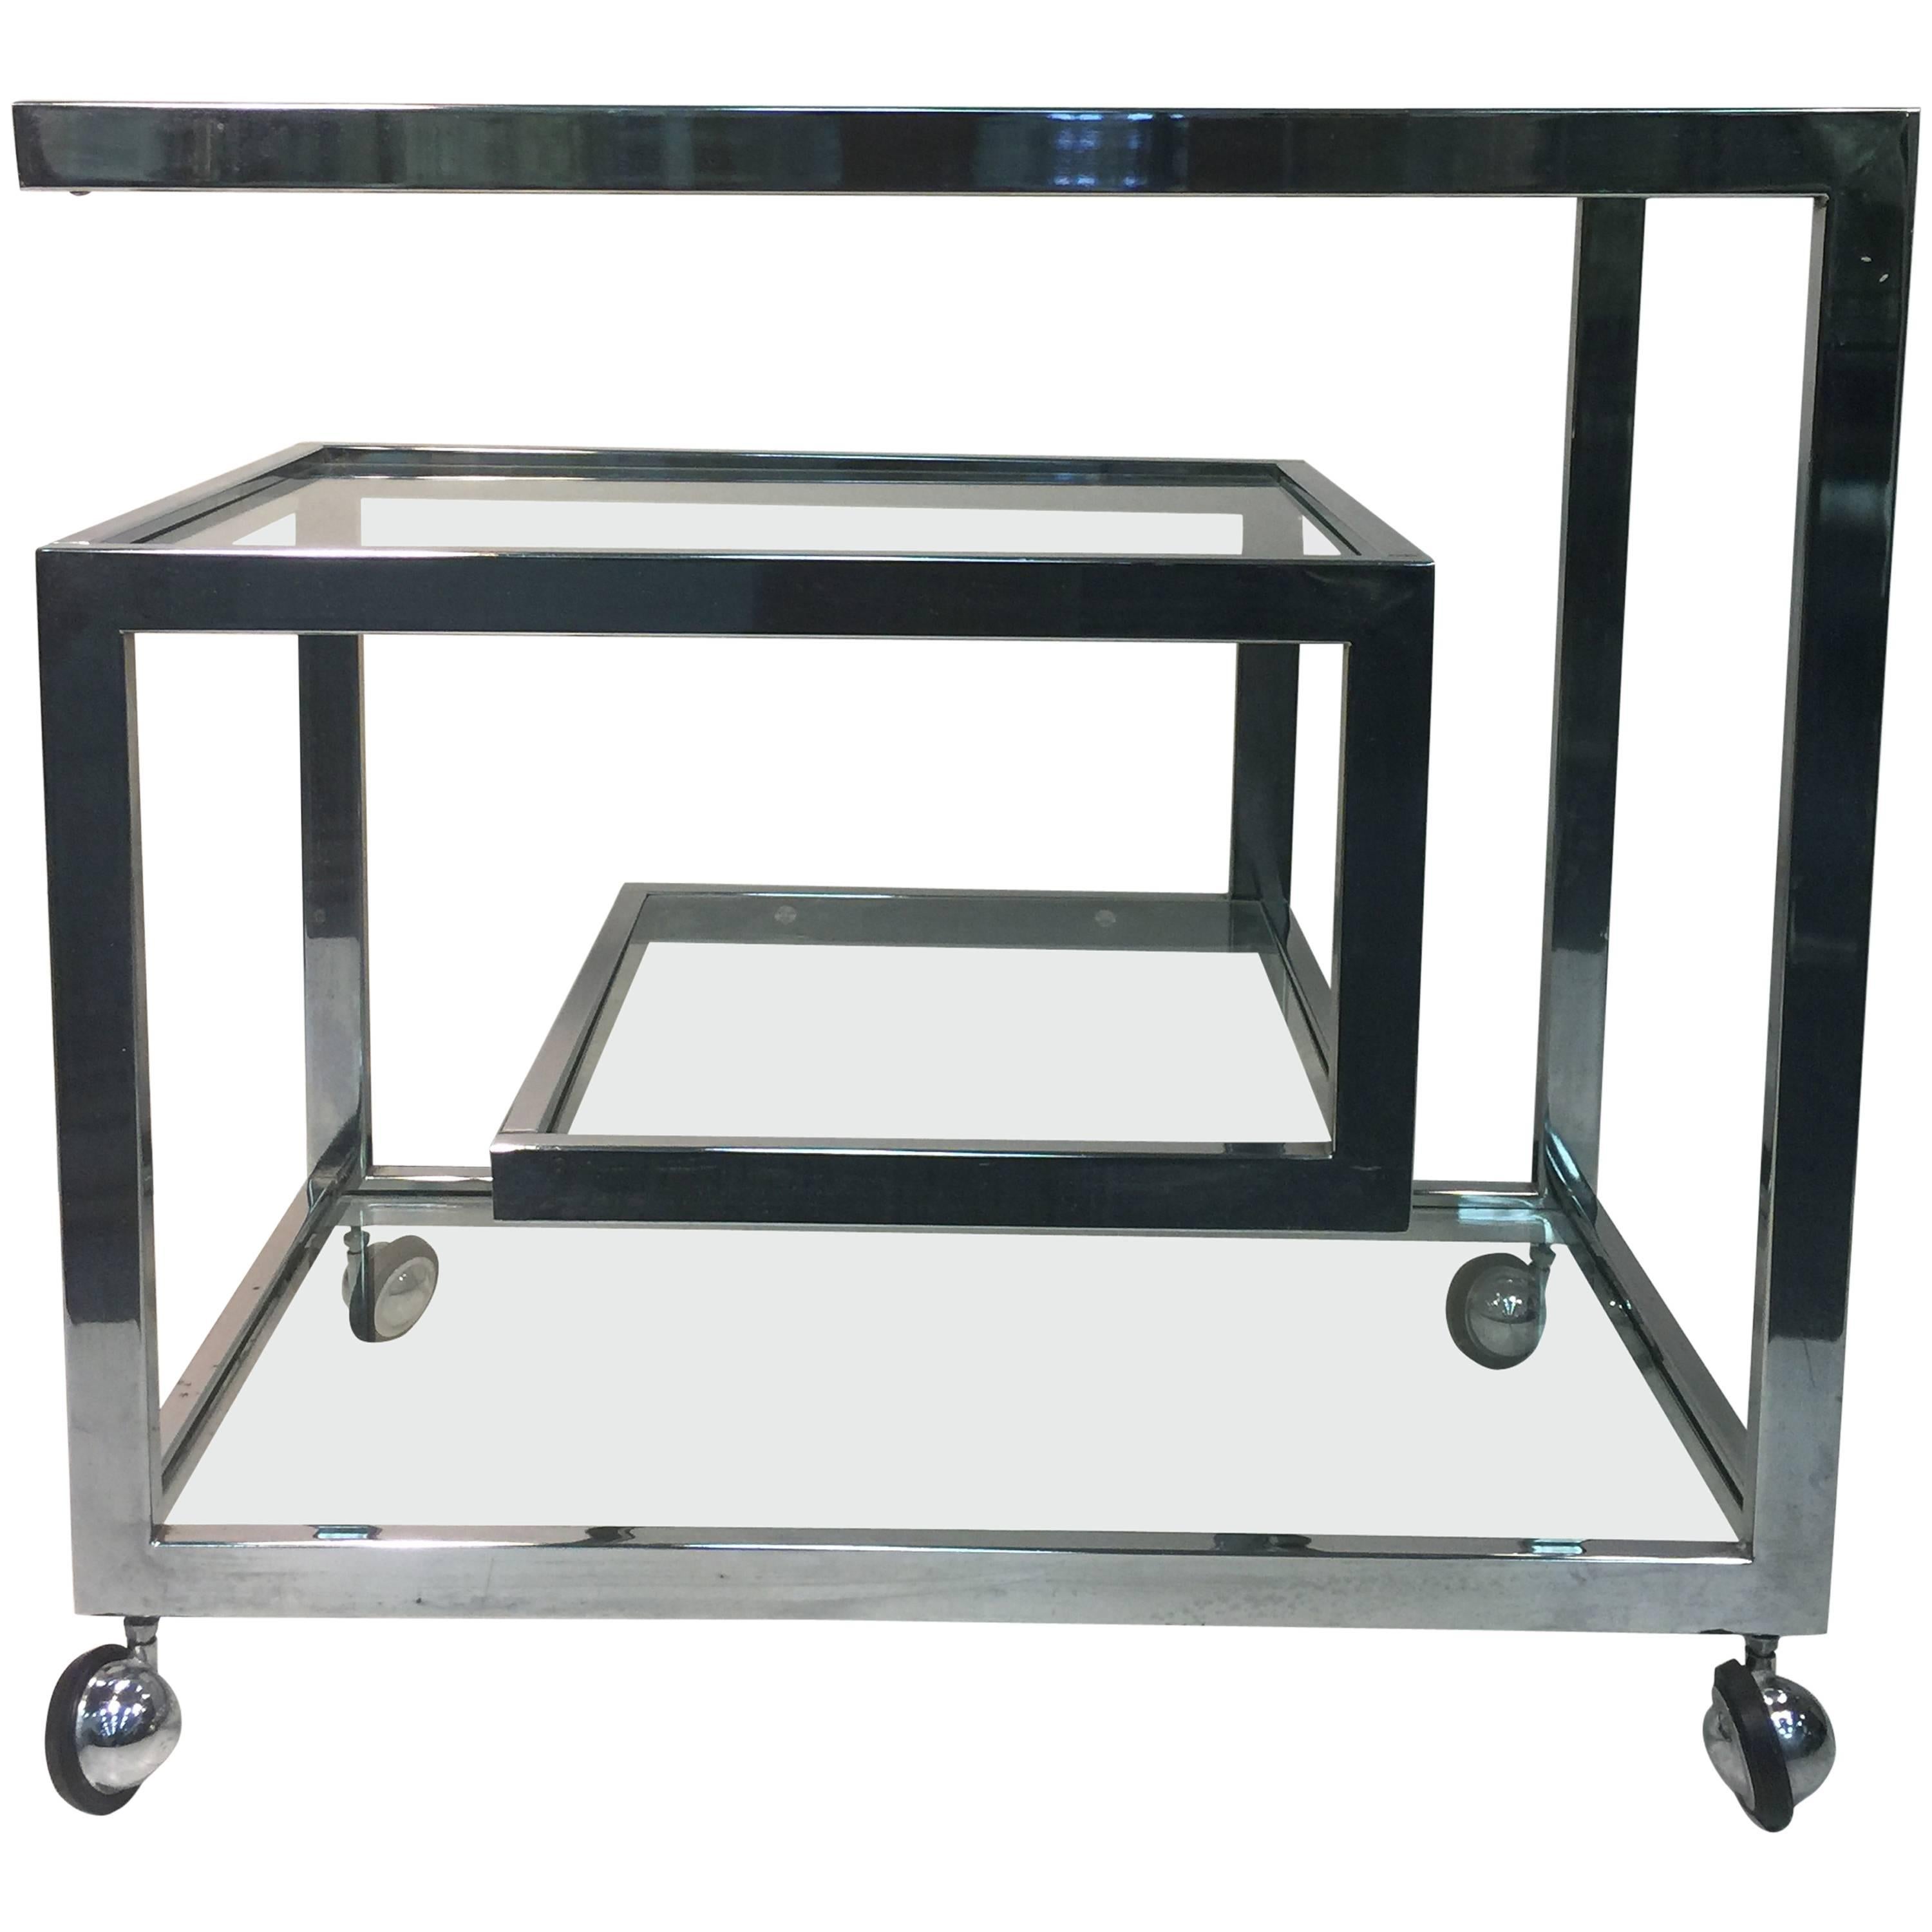 Exceptional Chrome Tea Cart with Geometric Design, style of Milo Baughman For Sale